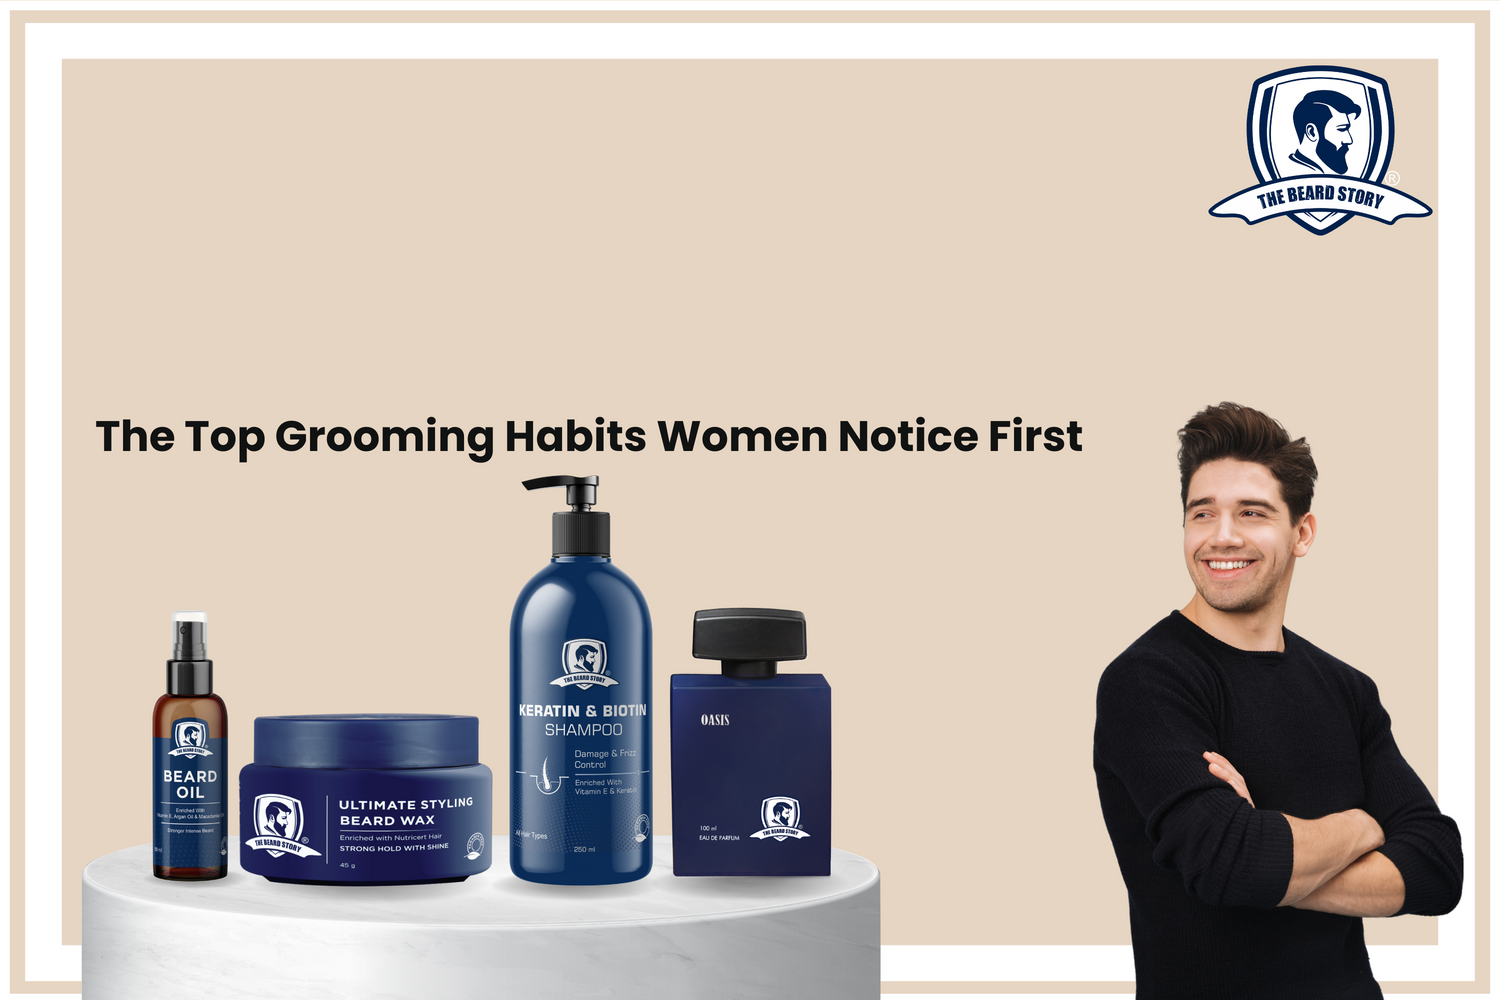 The Top Grooming Habits Women Notice First